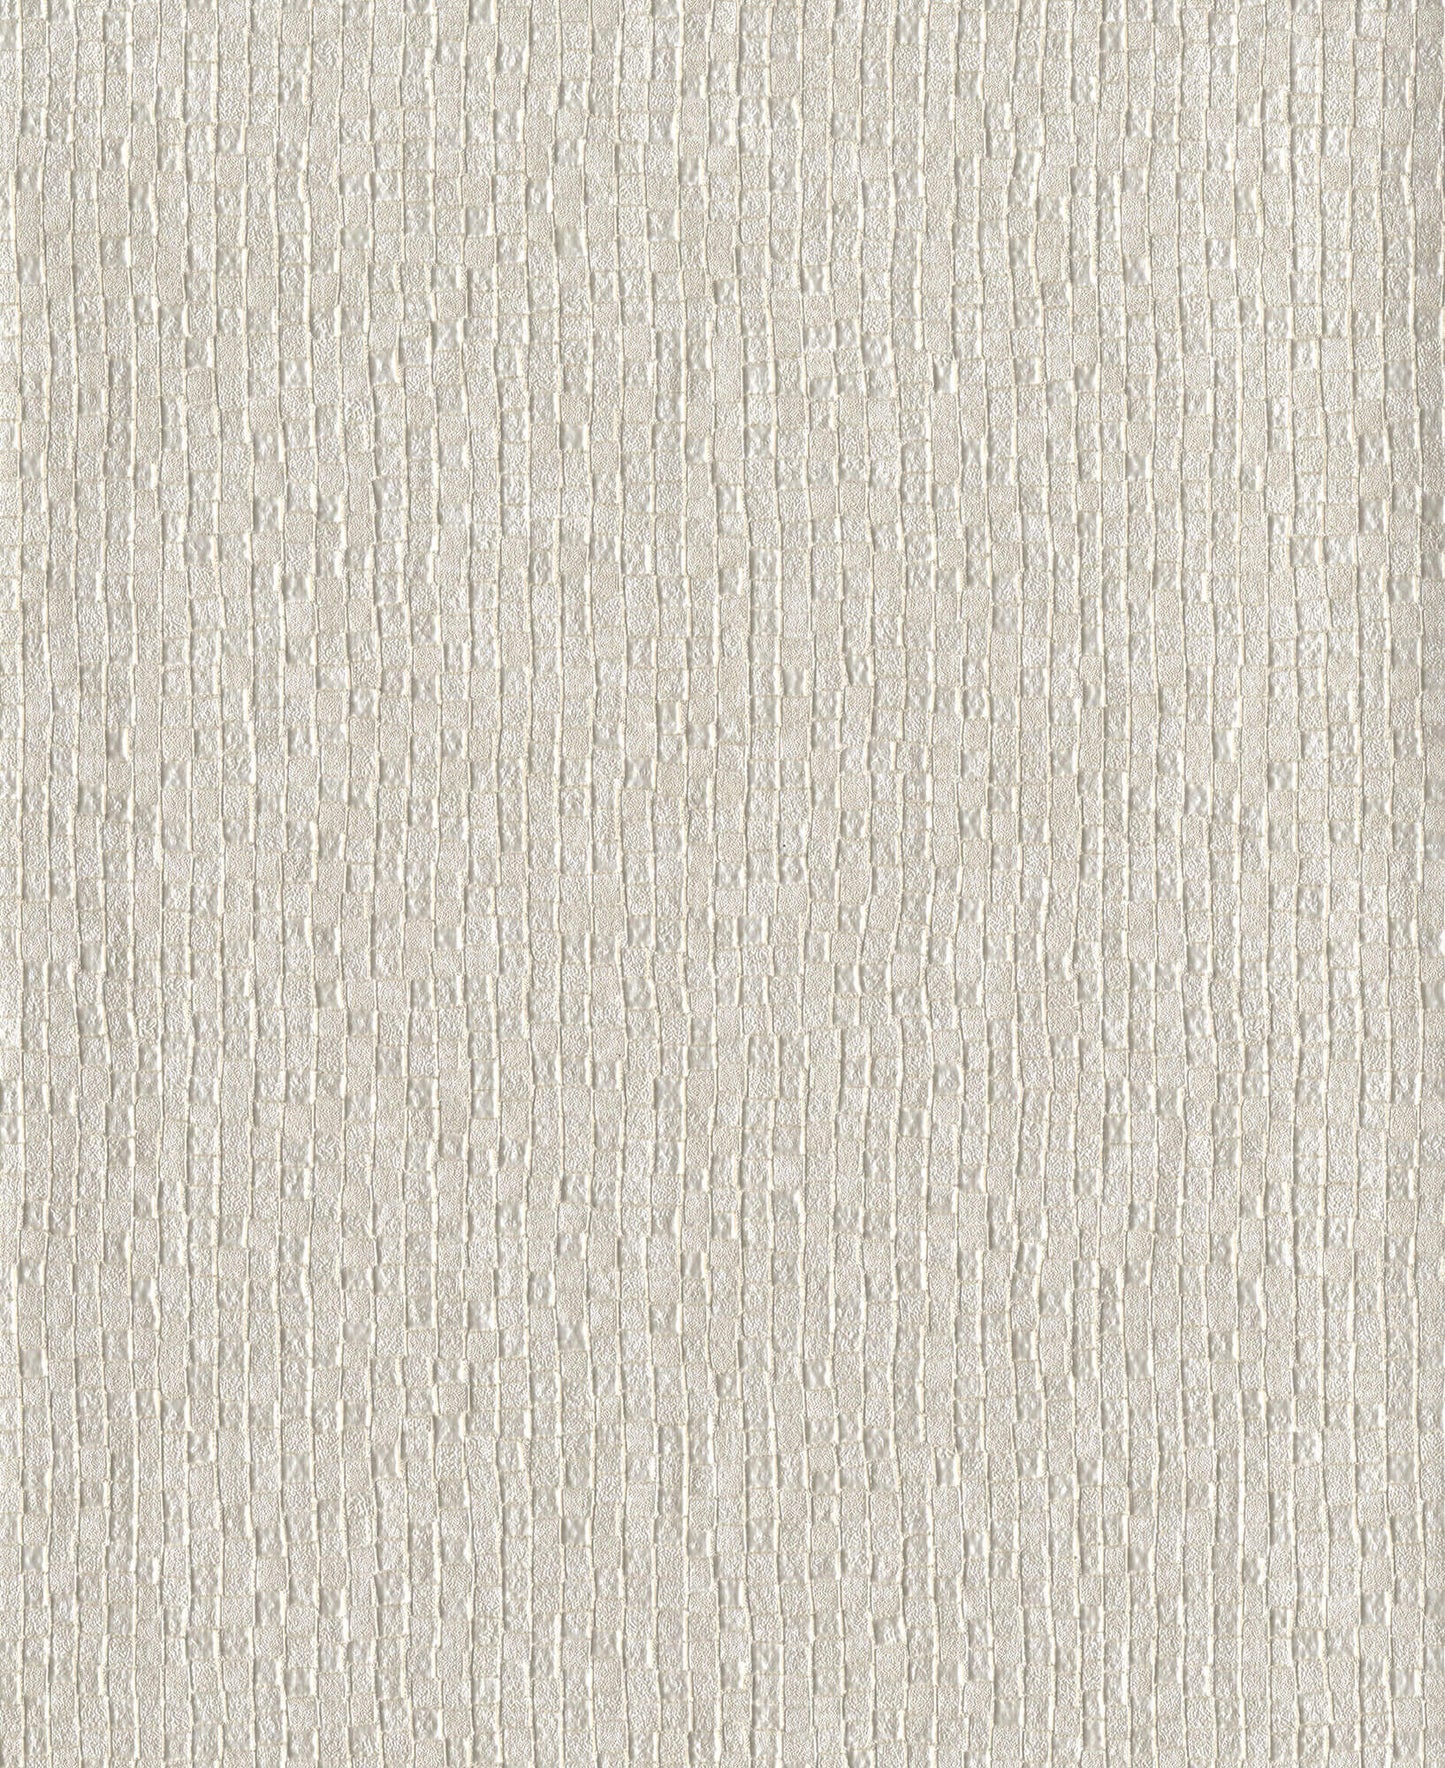 Candice Olson Moonstruck Pave Wallpaper - Off White